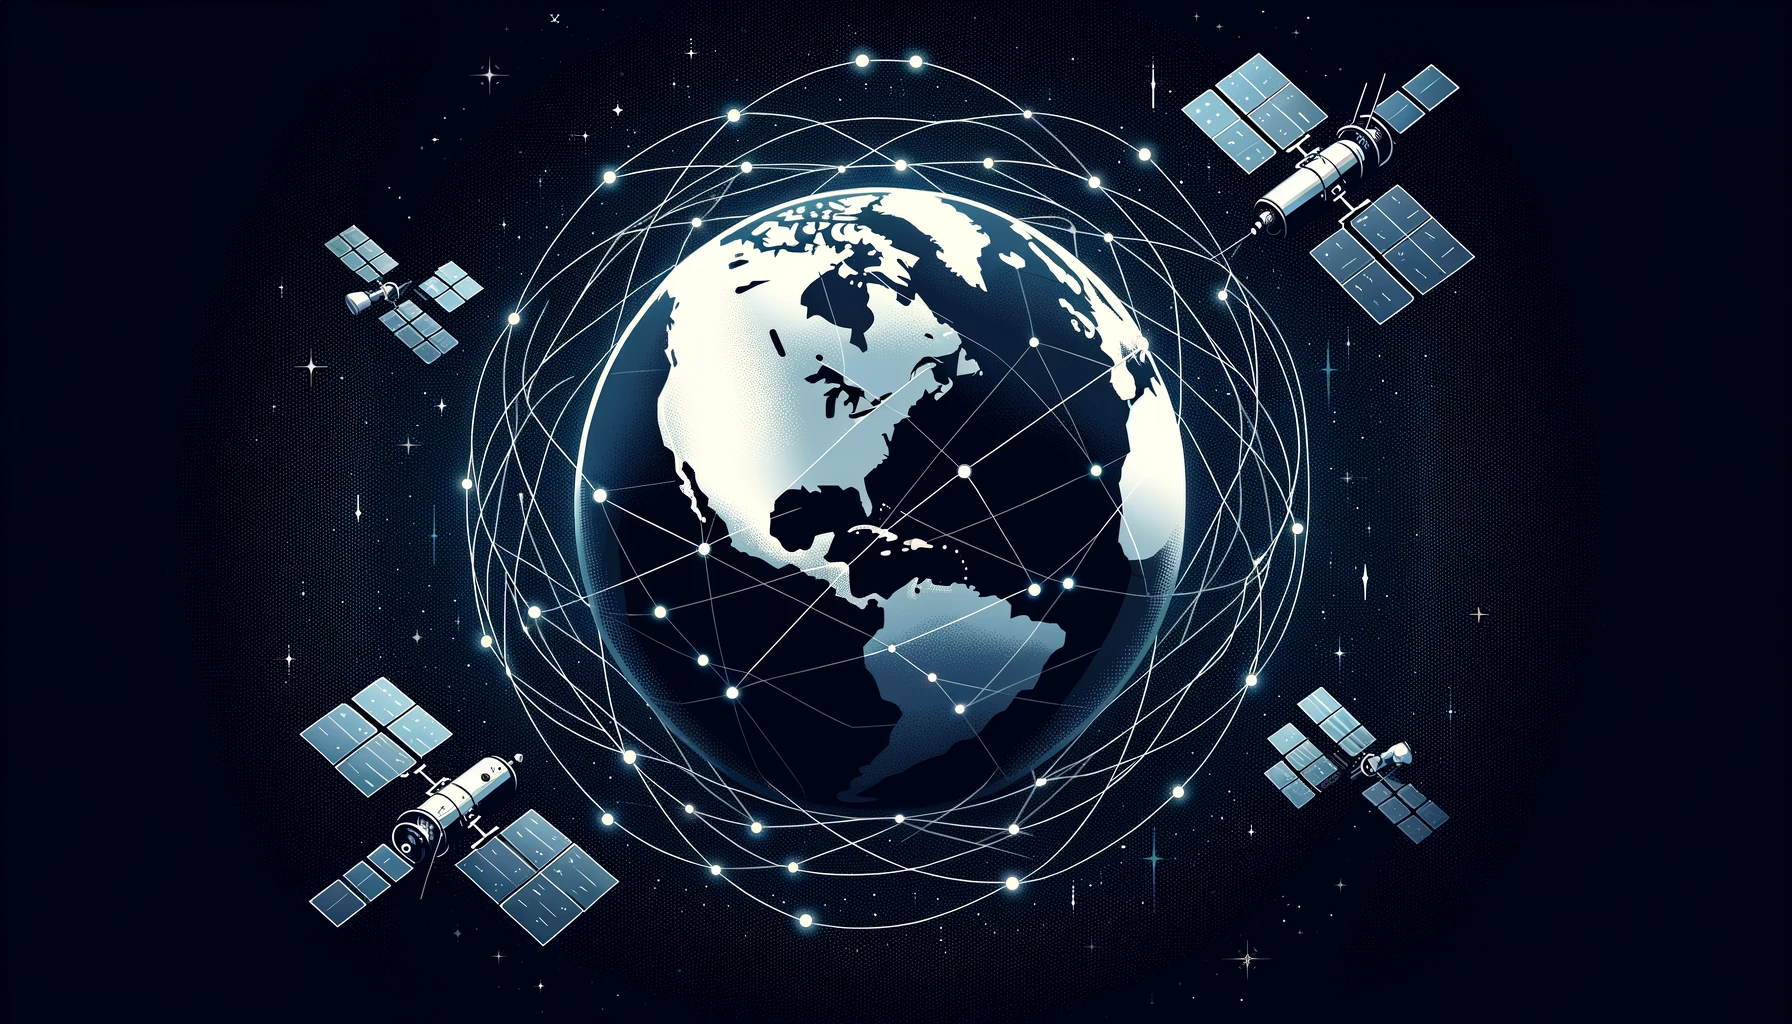 SpaceX's clandestine project: Developing a surveillance satellite network for American intelligence agencies